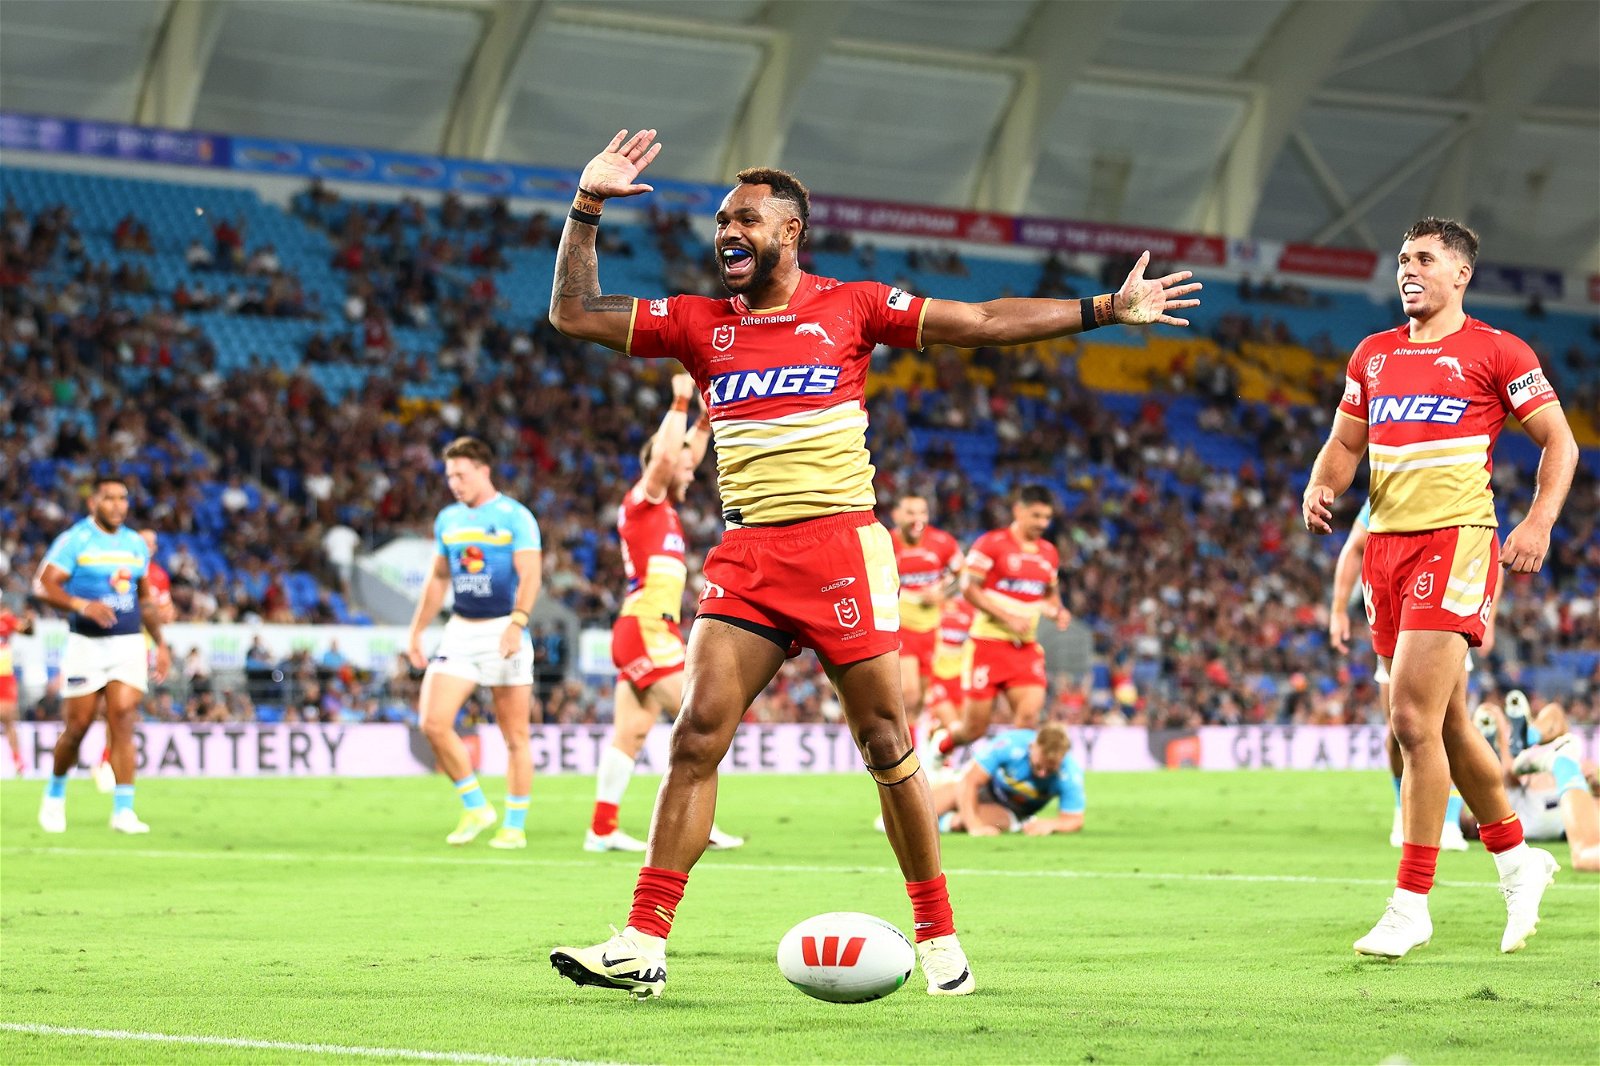 Hamiso Tabuai-Fidow of the Dolphins celebrates a try against the Titans.